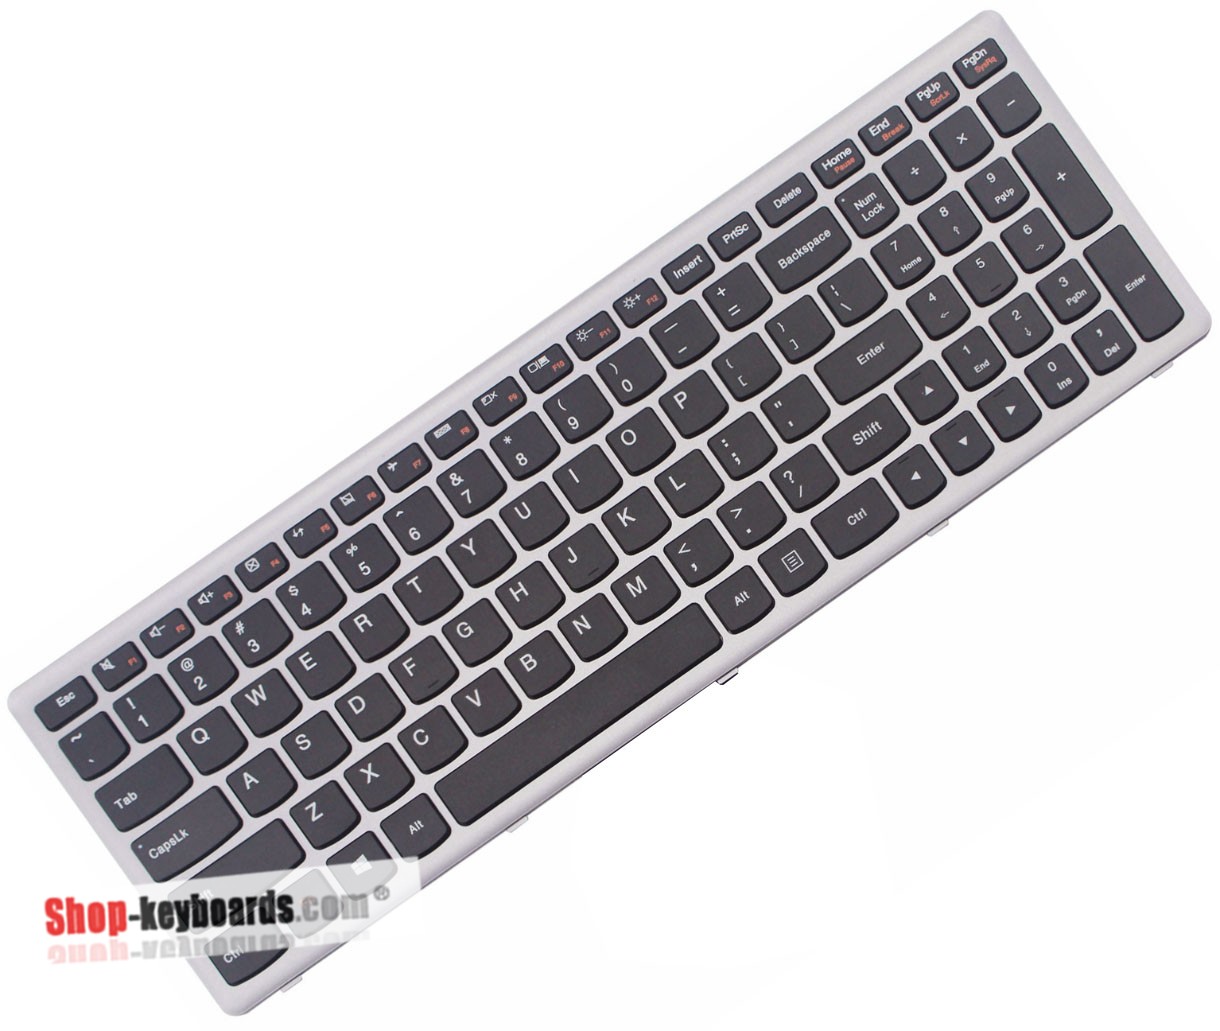 Lenovo Ideapad P500 Keyboard replacement